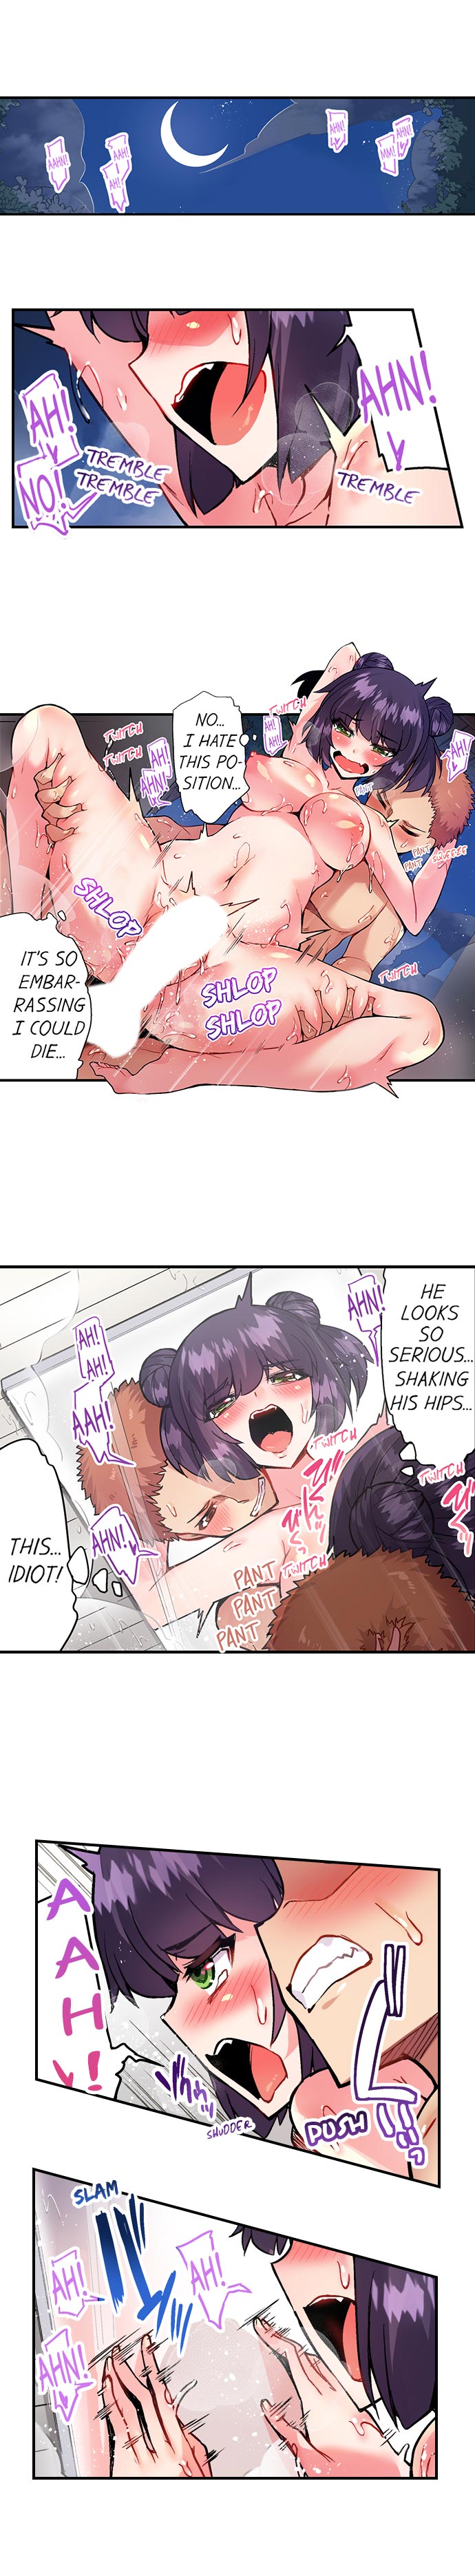 Traditional Job of Washing Girls’ Body - Chapter 94 Page 2